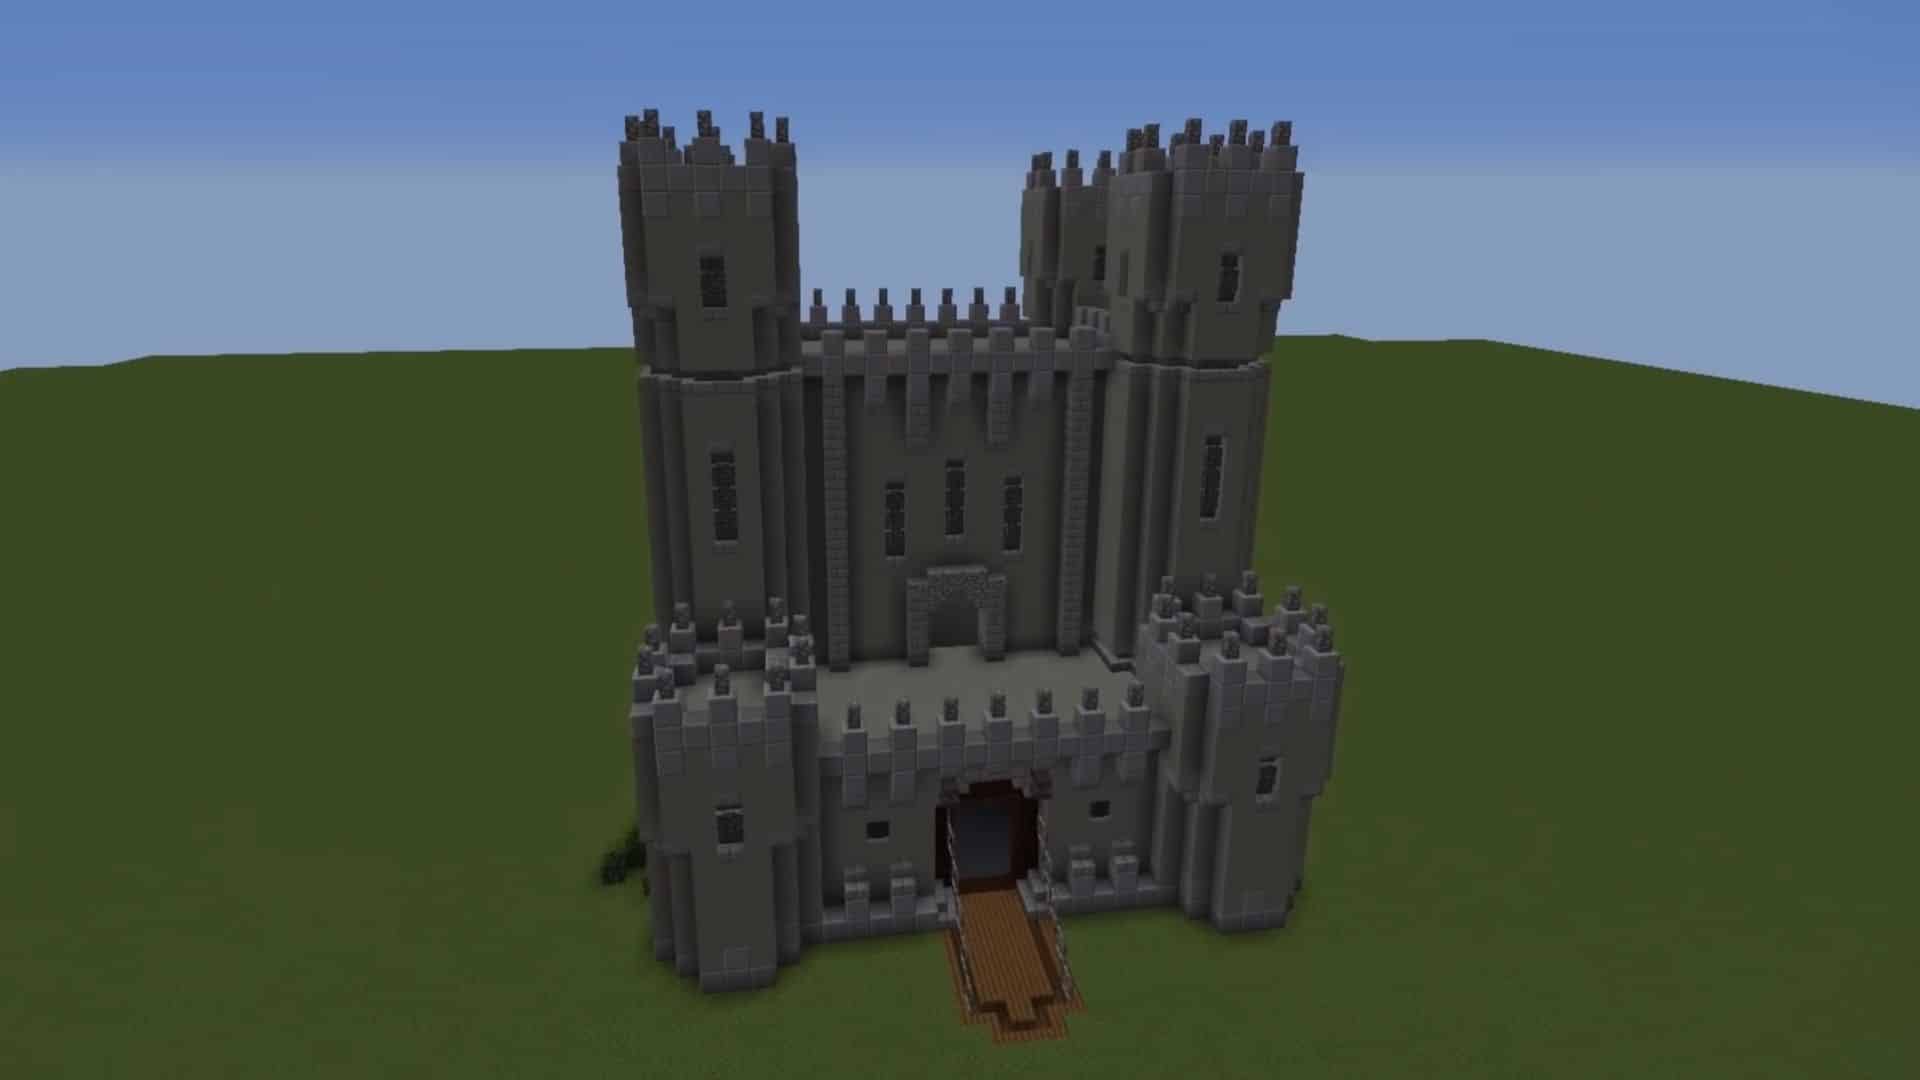 An image of a castle in Minecraft